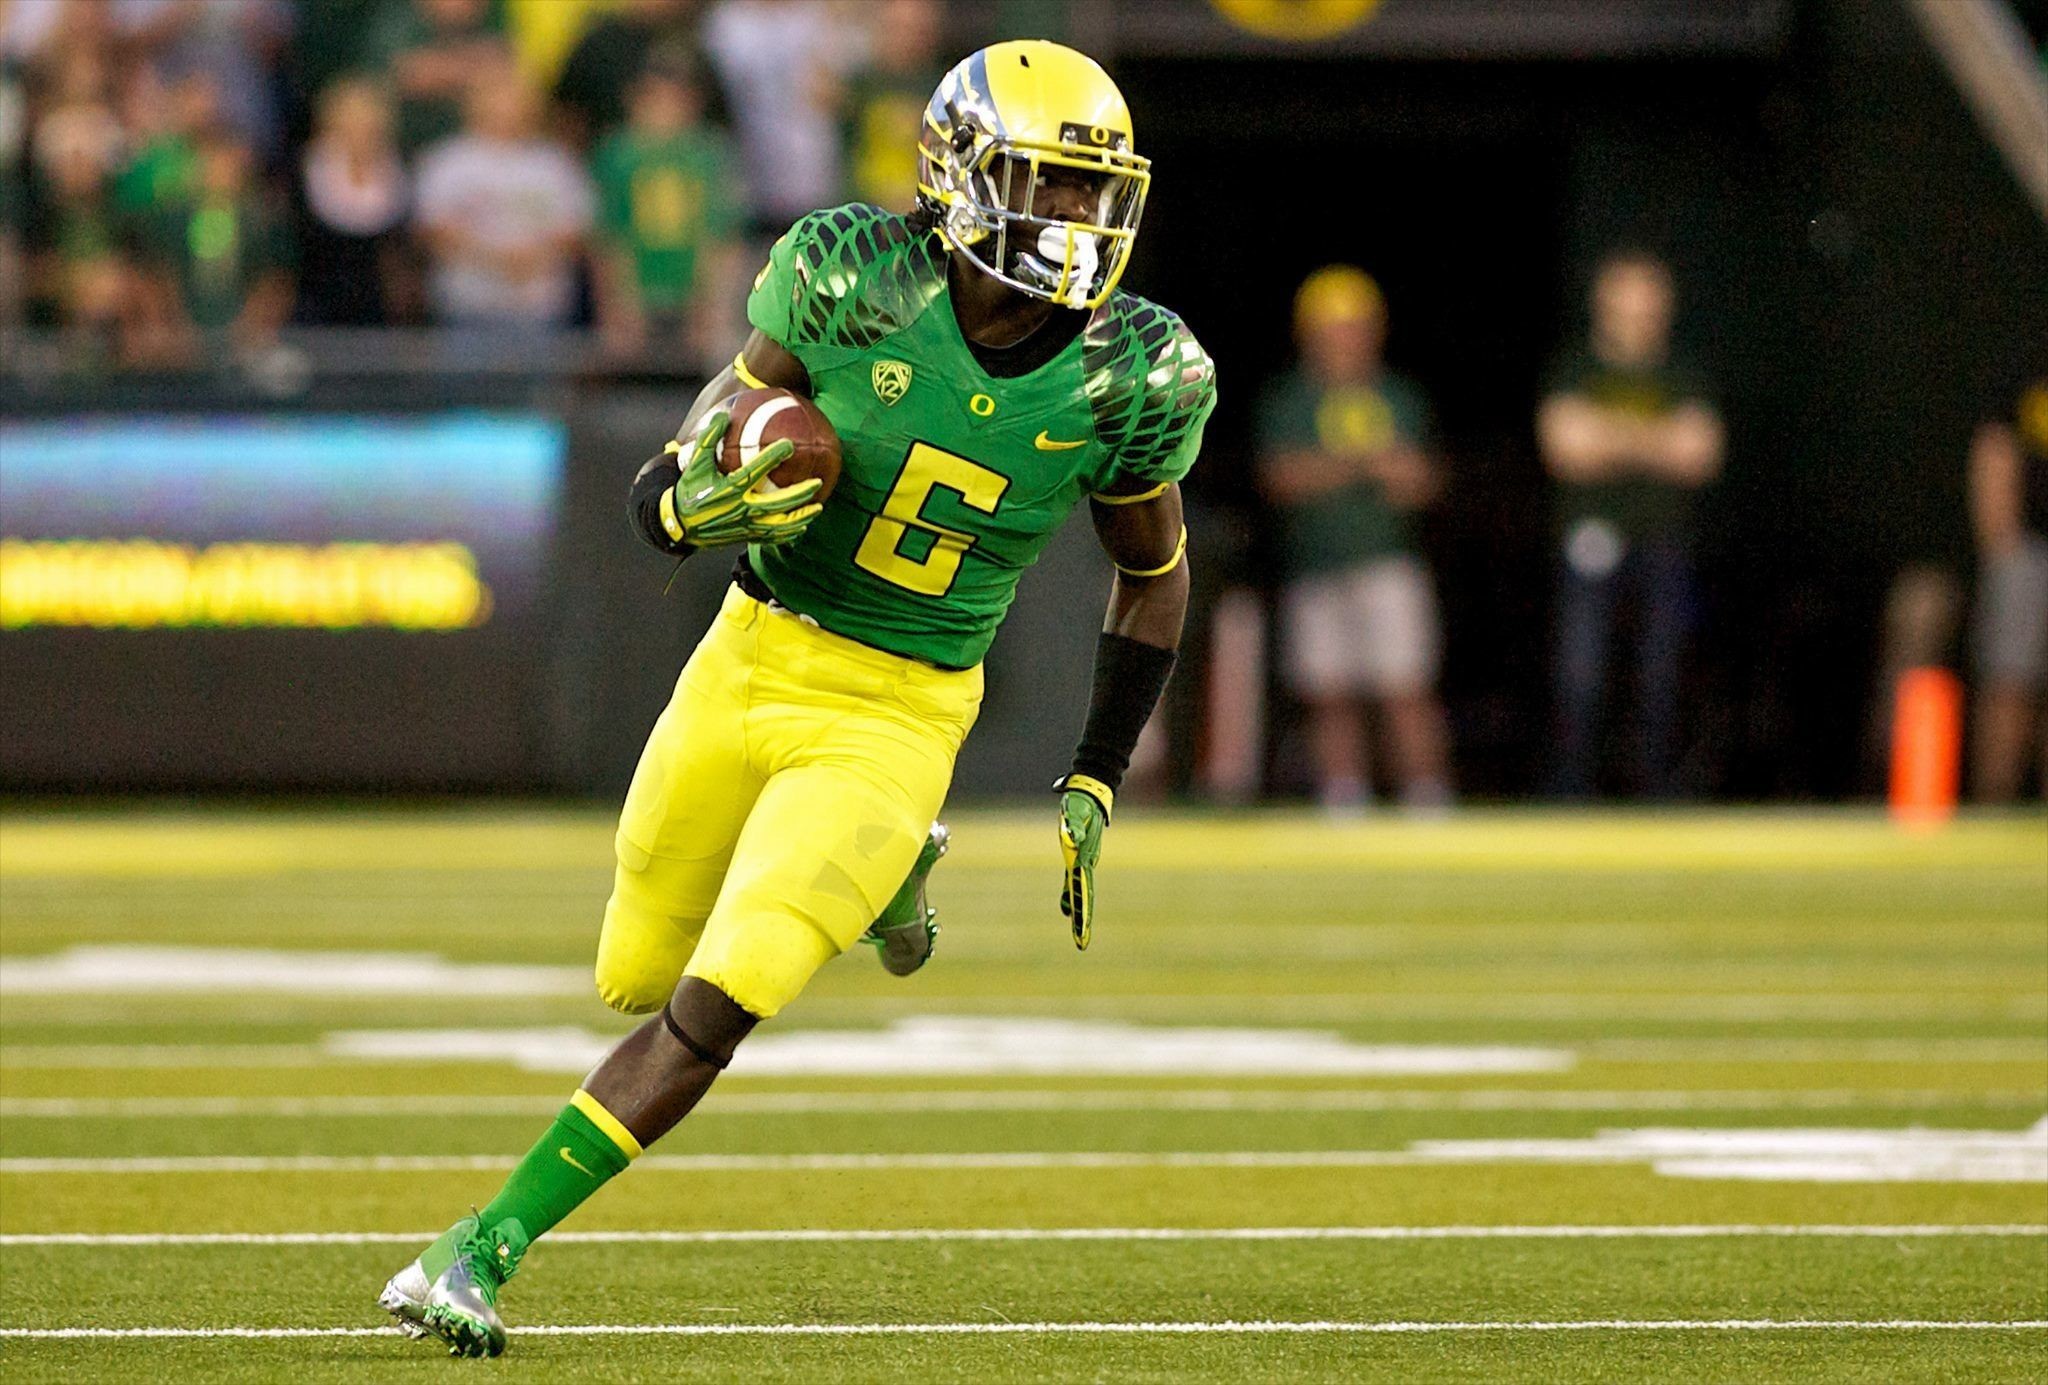 2048x1385  Oregon RB De'Anthony Thomas is ready to play on Saturday